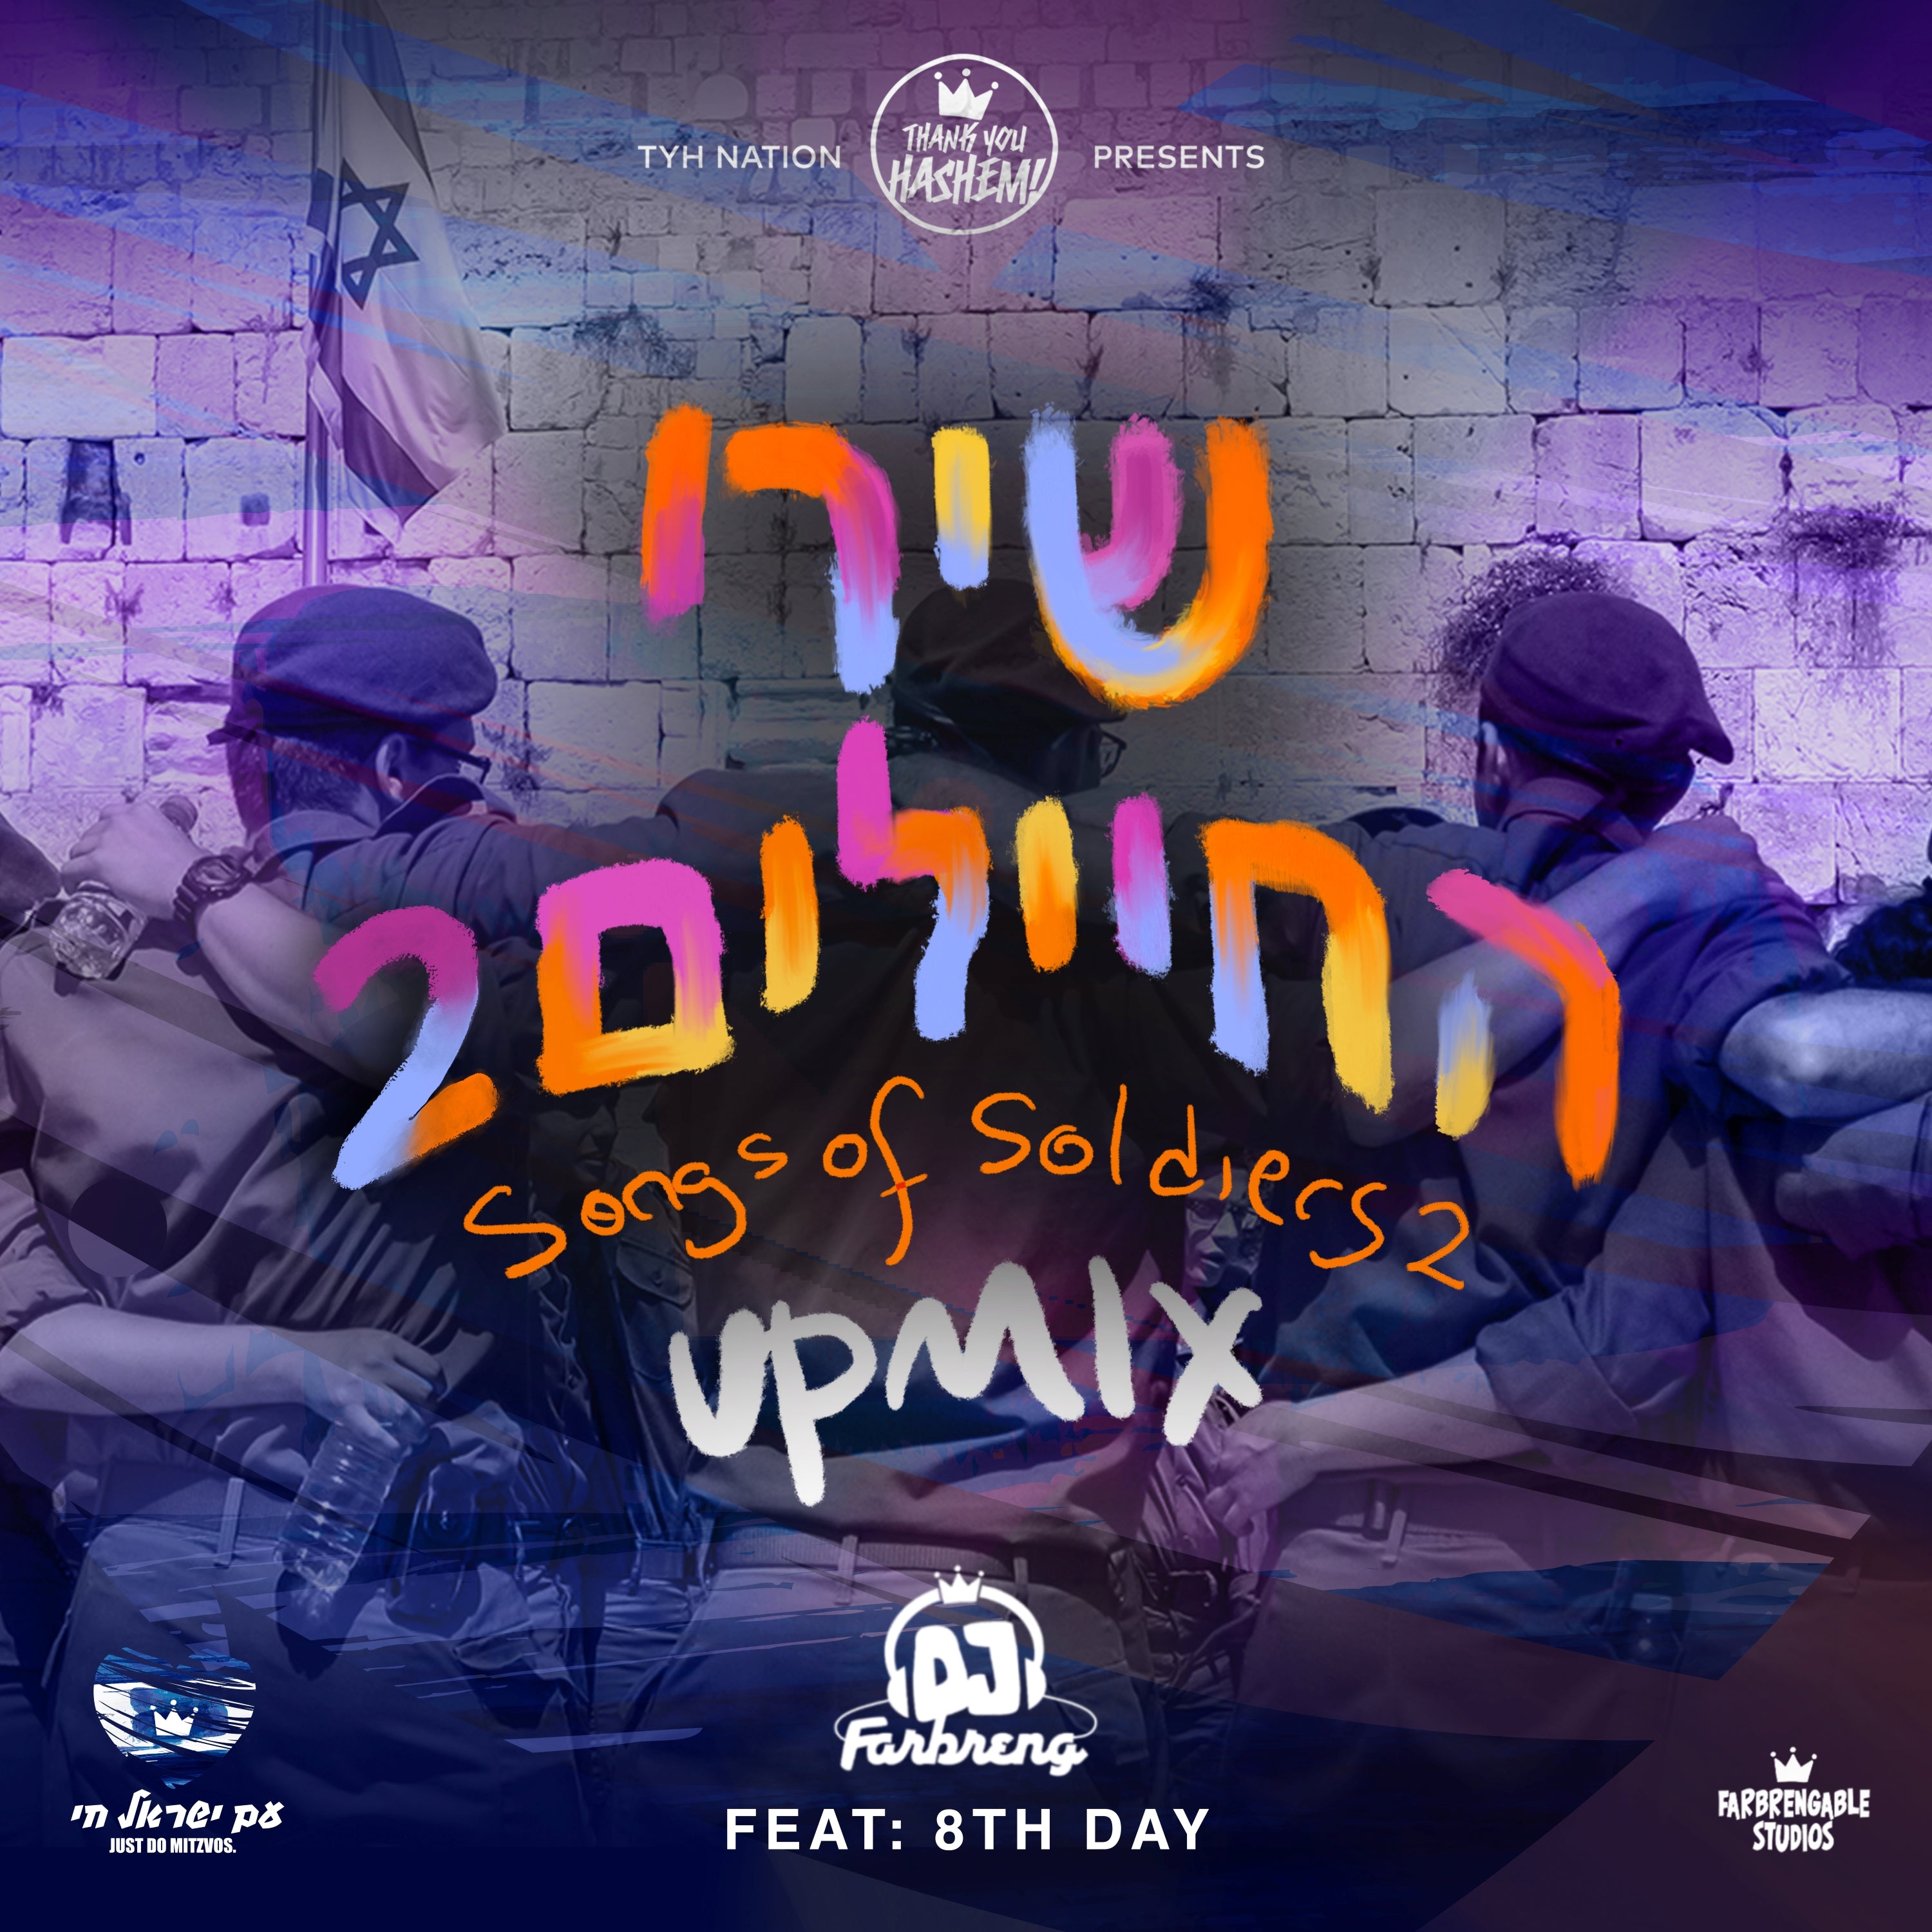 DJ Farbreng Ft. 8th Day - Songs of Soldiers 2 [Upmix] (Single)